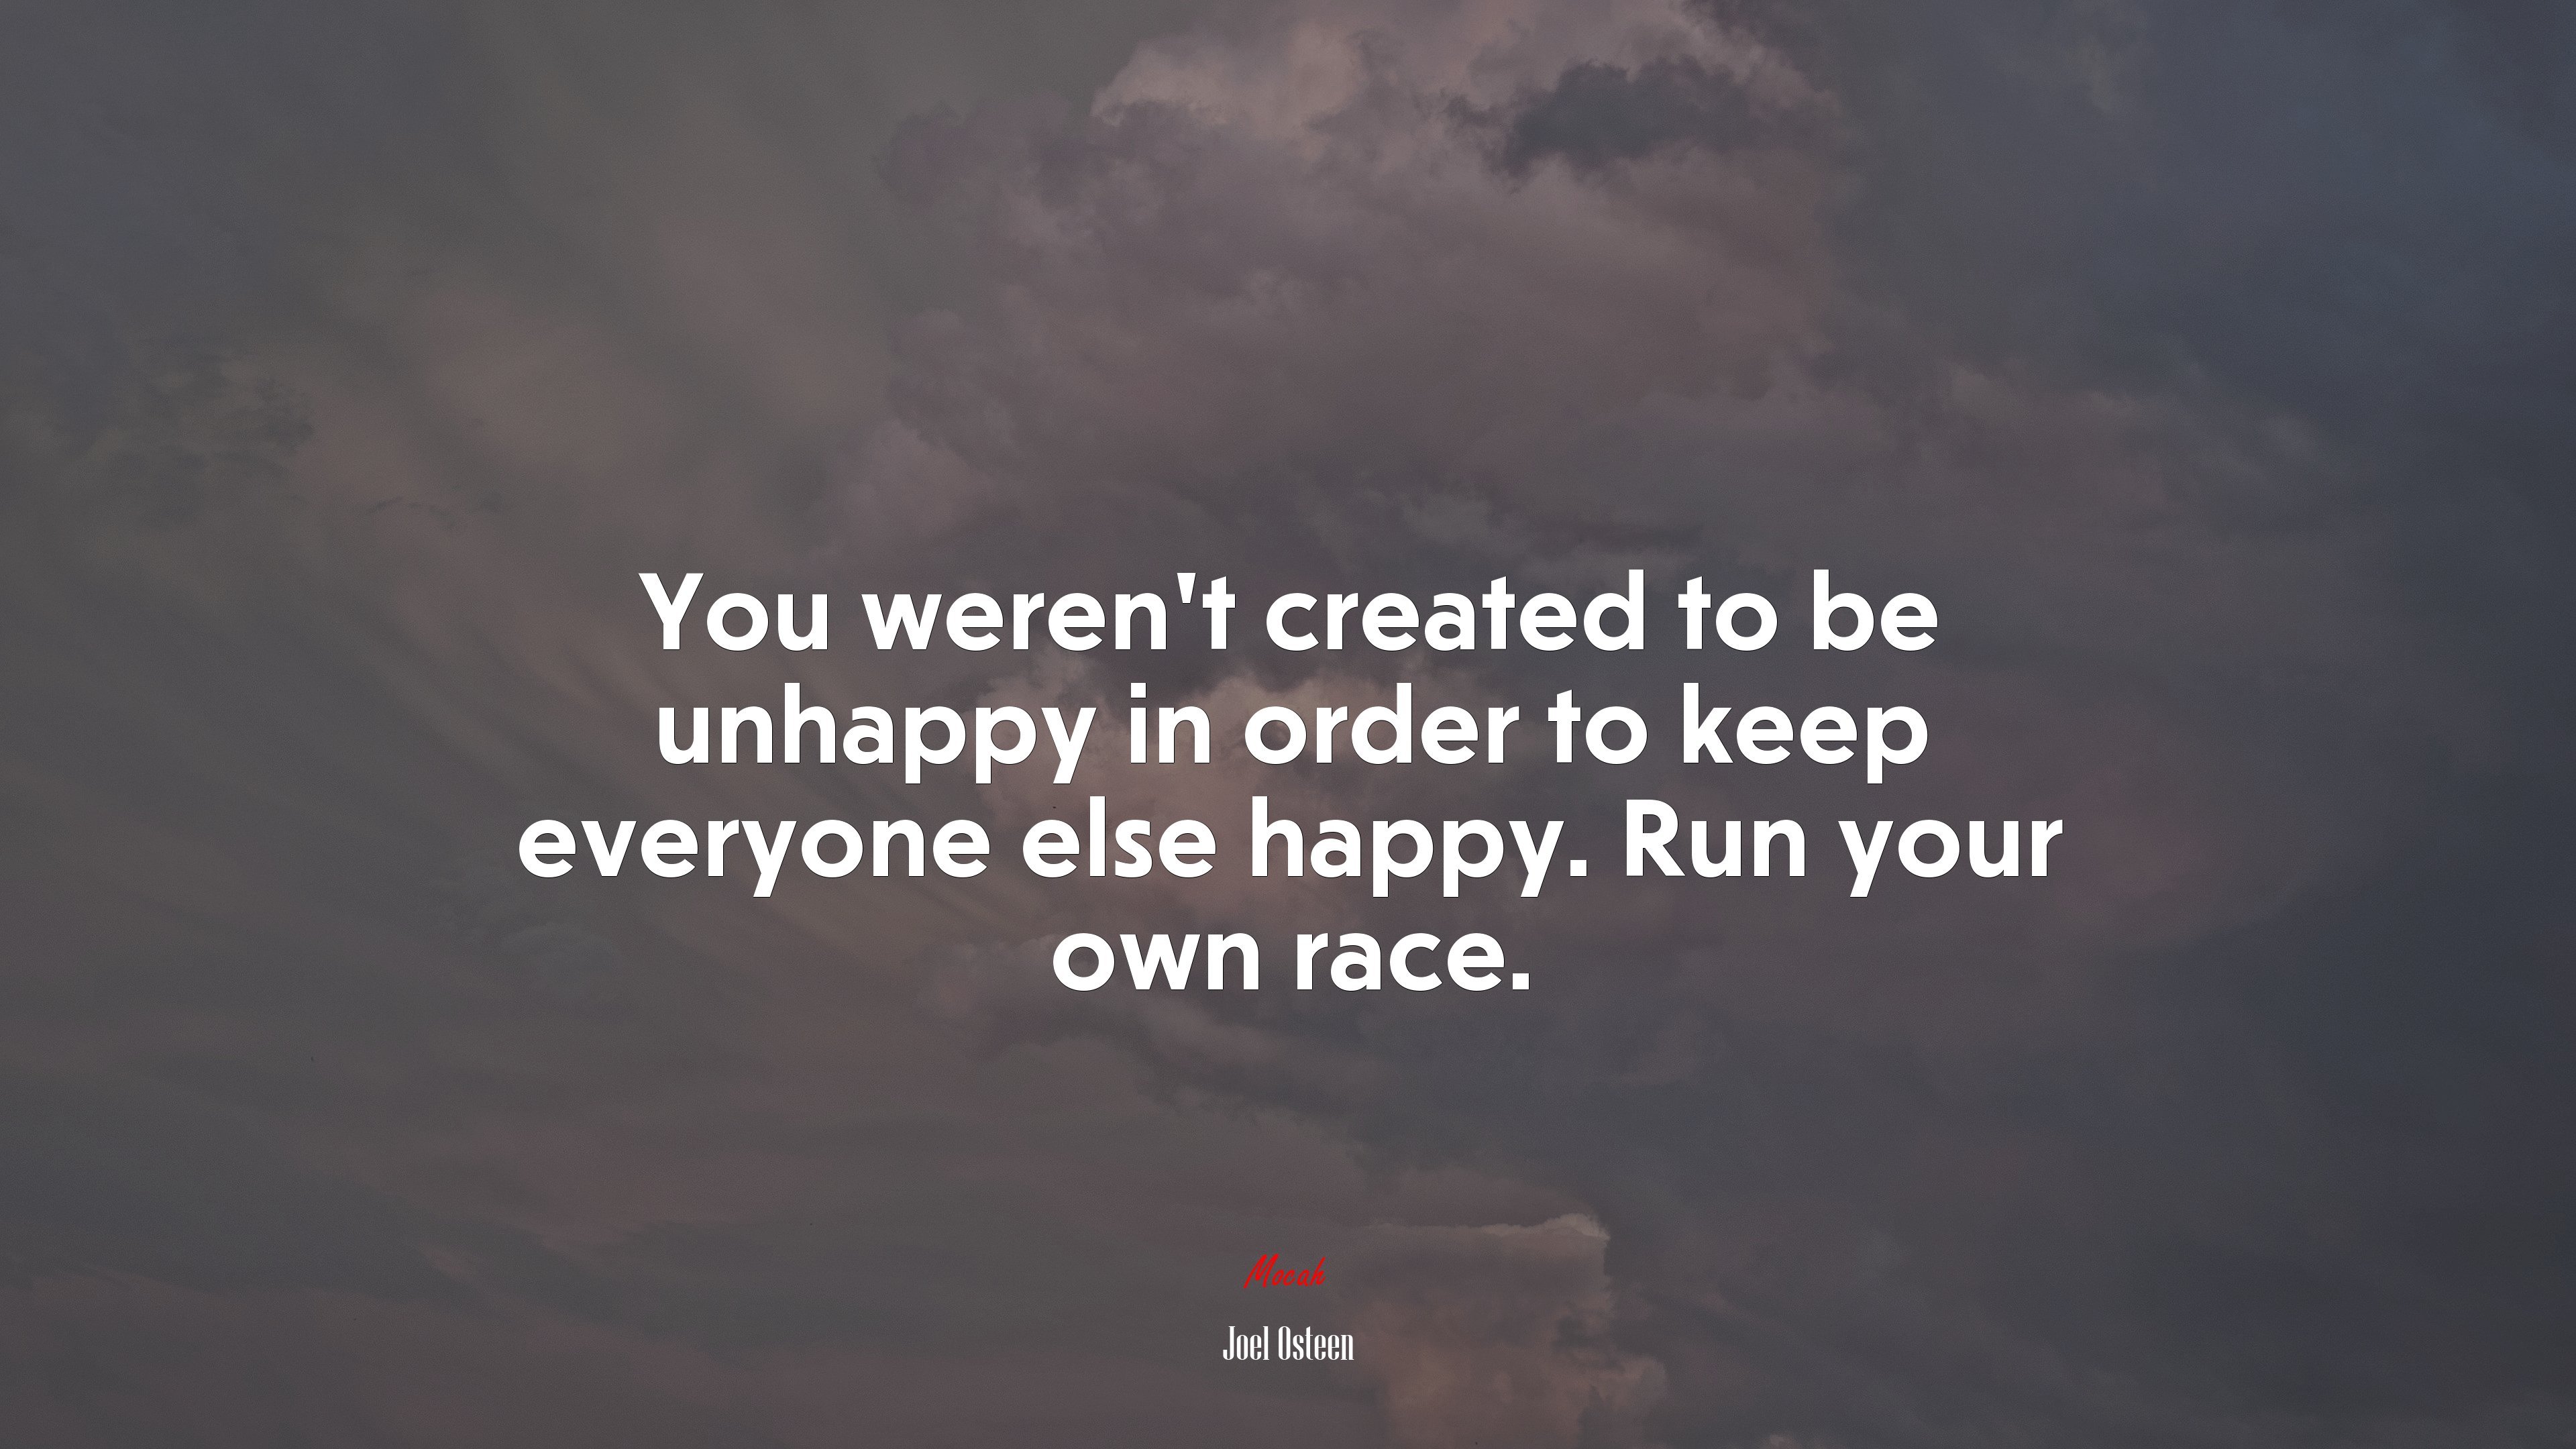 You weren't created to be unhappy in order to keep everyone else happy. Run your own race. Joel Osteen quote, 4k wallpaper HD Wallpaper